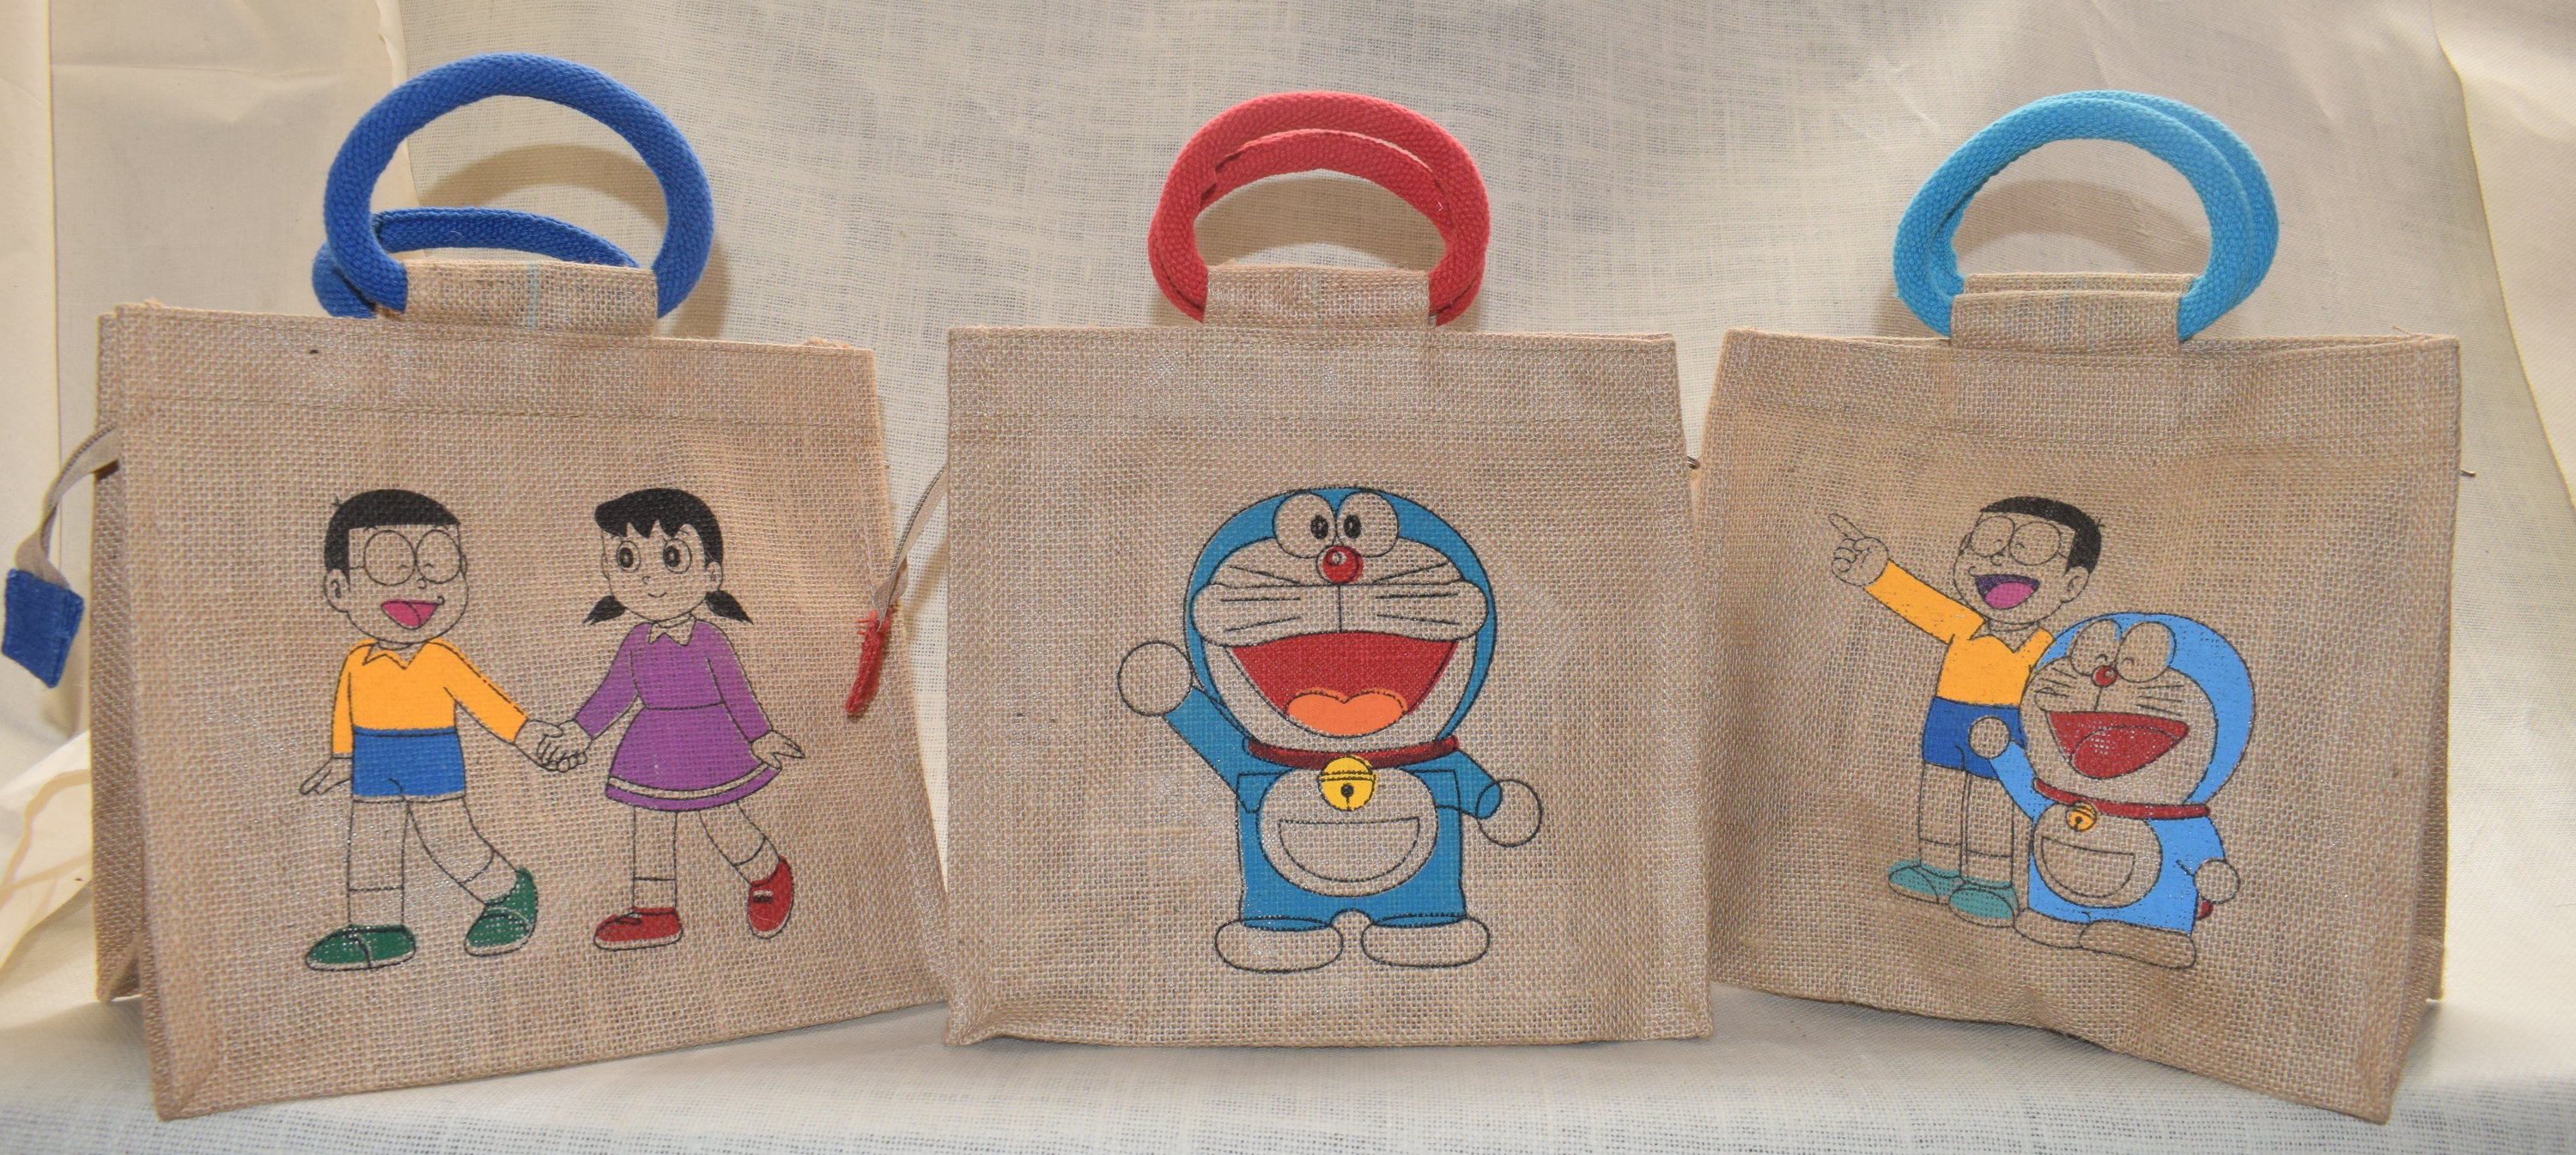 Kids-Lunch-bags-banner